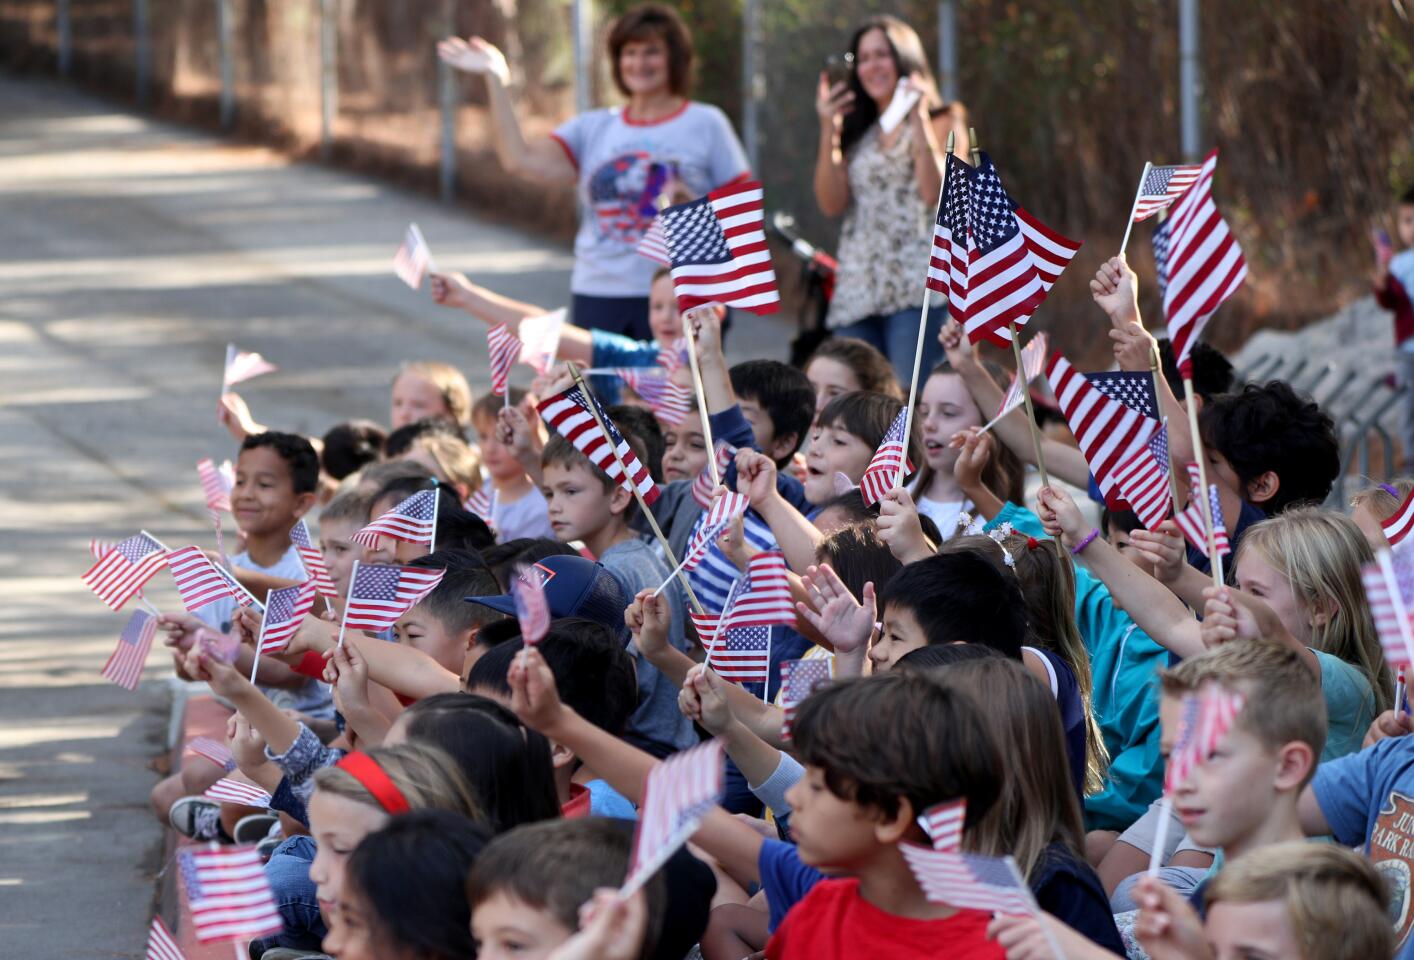 Mountain Elementary School students cheer during the annual Crescenta Valley Remembrance Motorcade, organized by members of the Crescenta Valley Chamber of Commerce, in La Crescenta on Wednesday, Sept. 11, 2019.